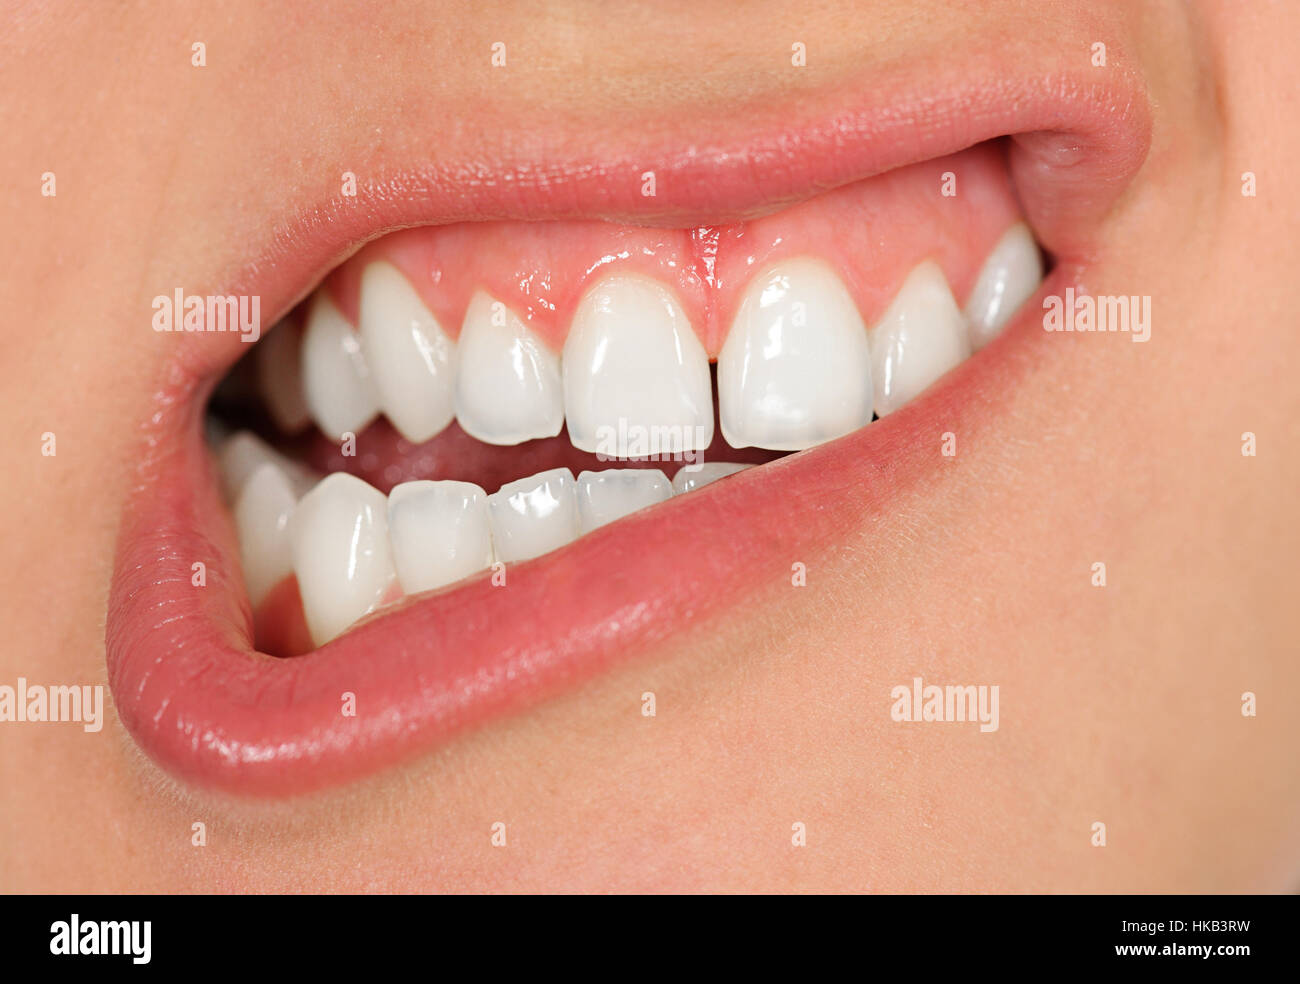 Opened mouth with teeth Stock Photo